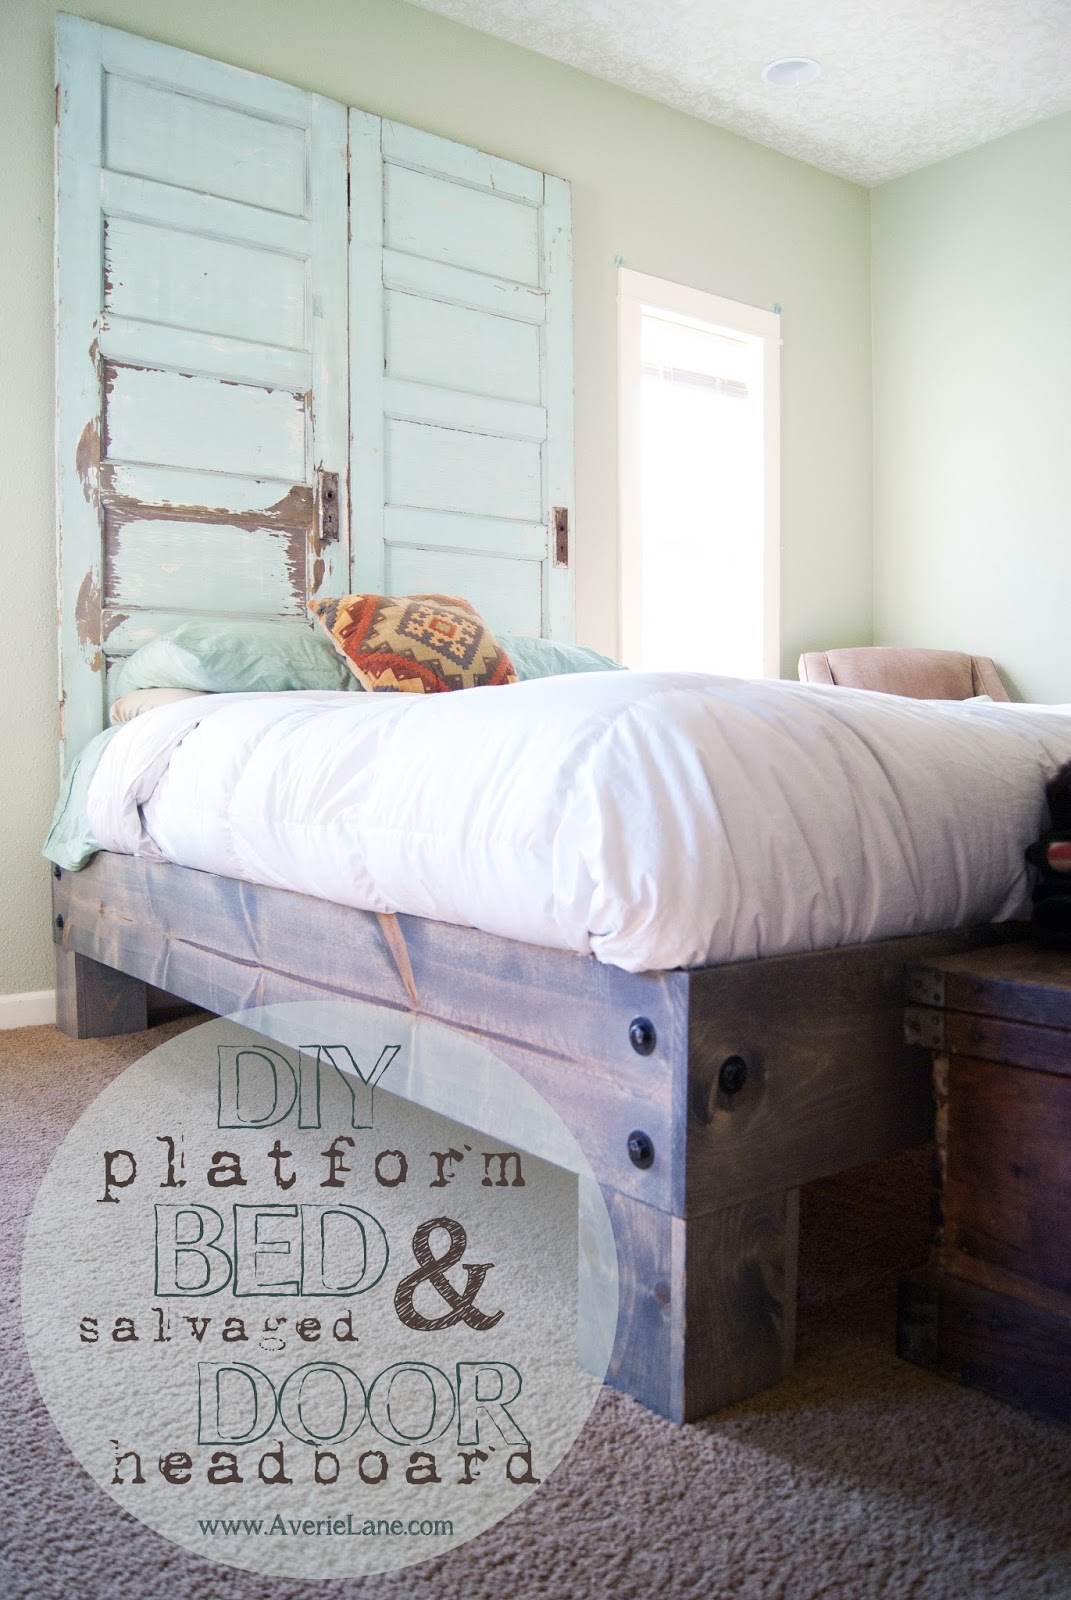 21 Diy Bed Frames To Give Yourself The Restful Spot Of Your Dreams!